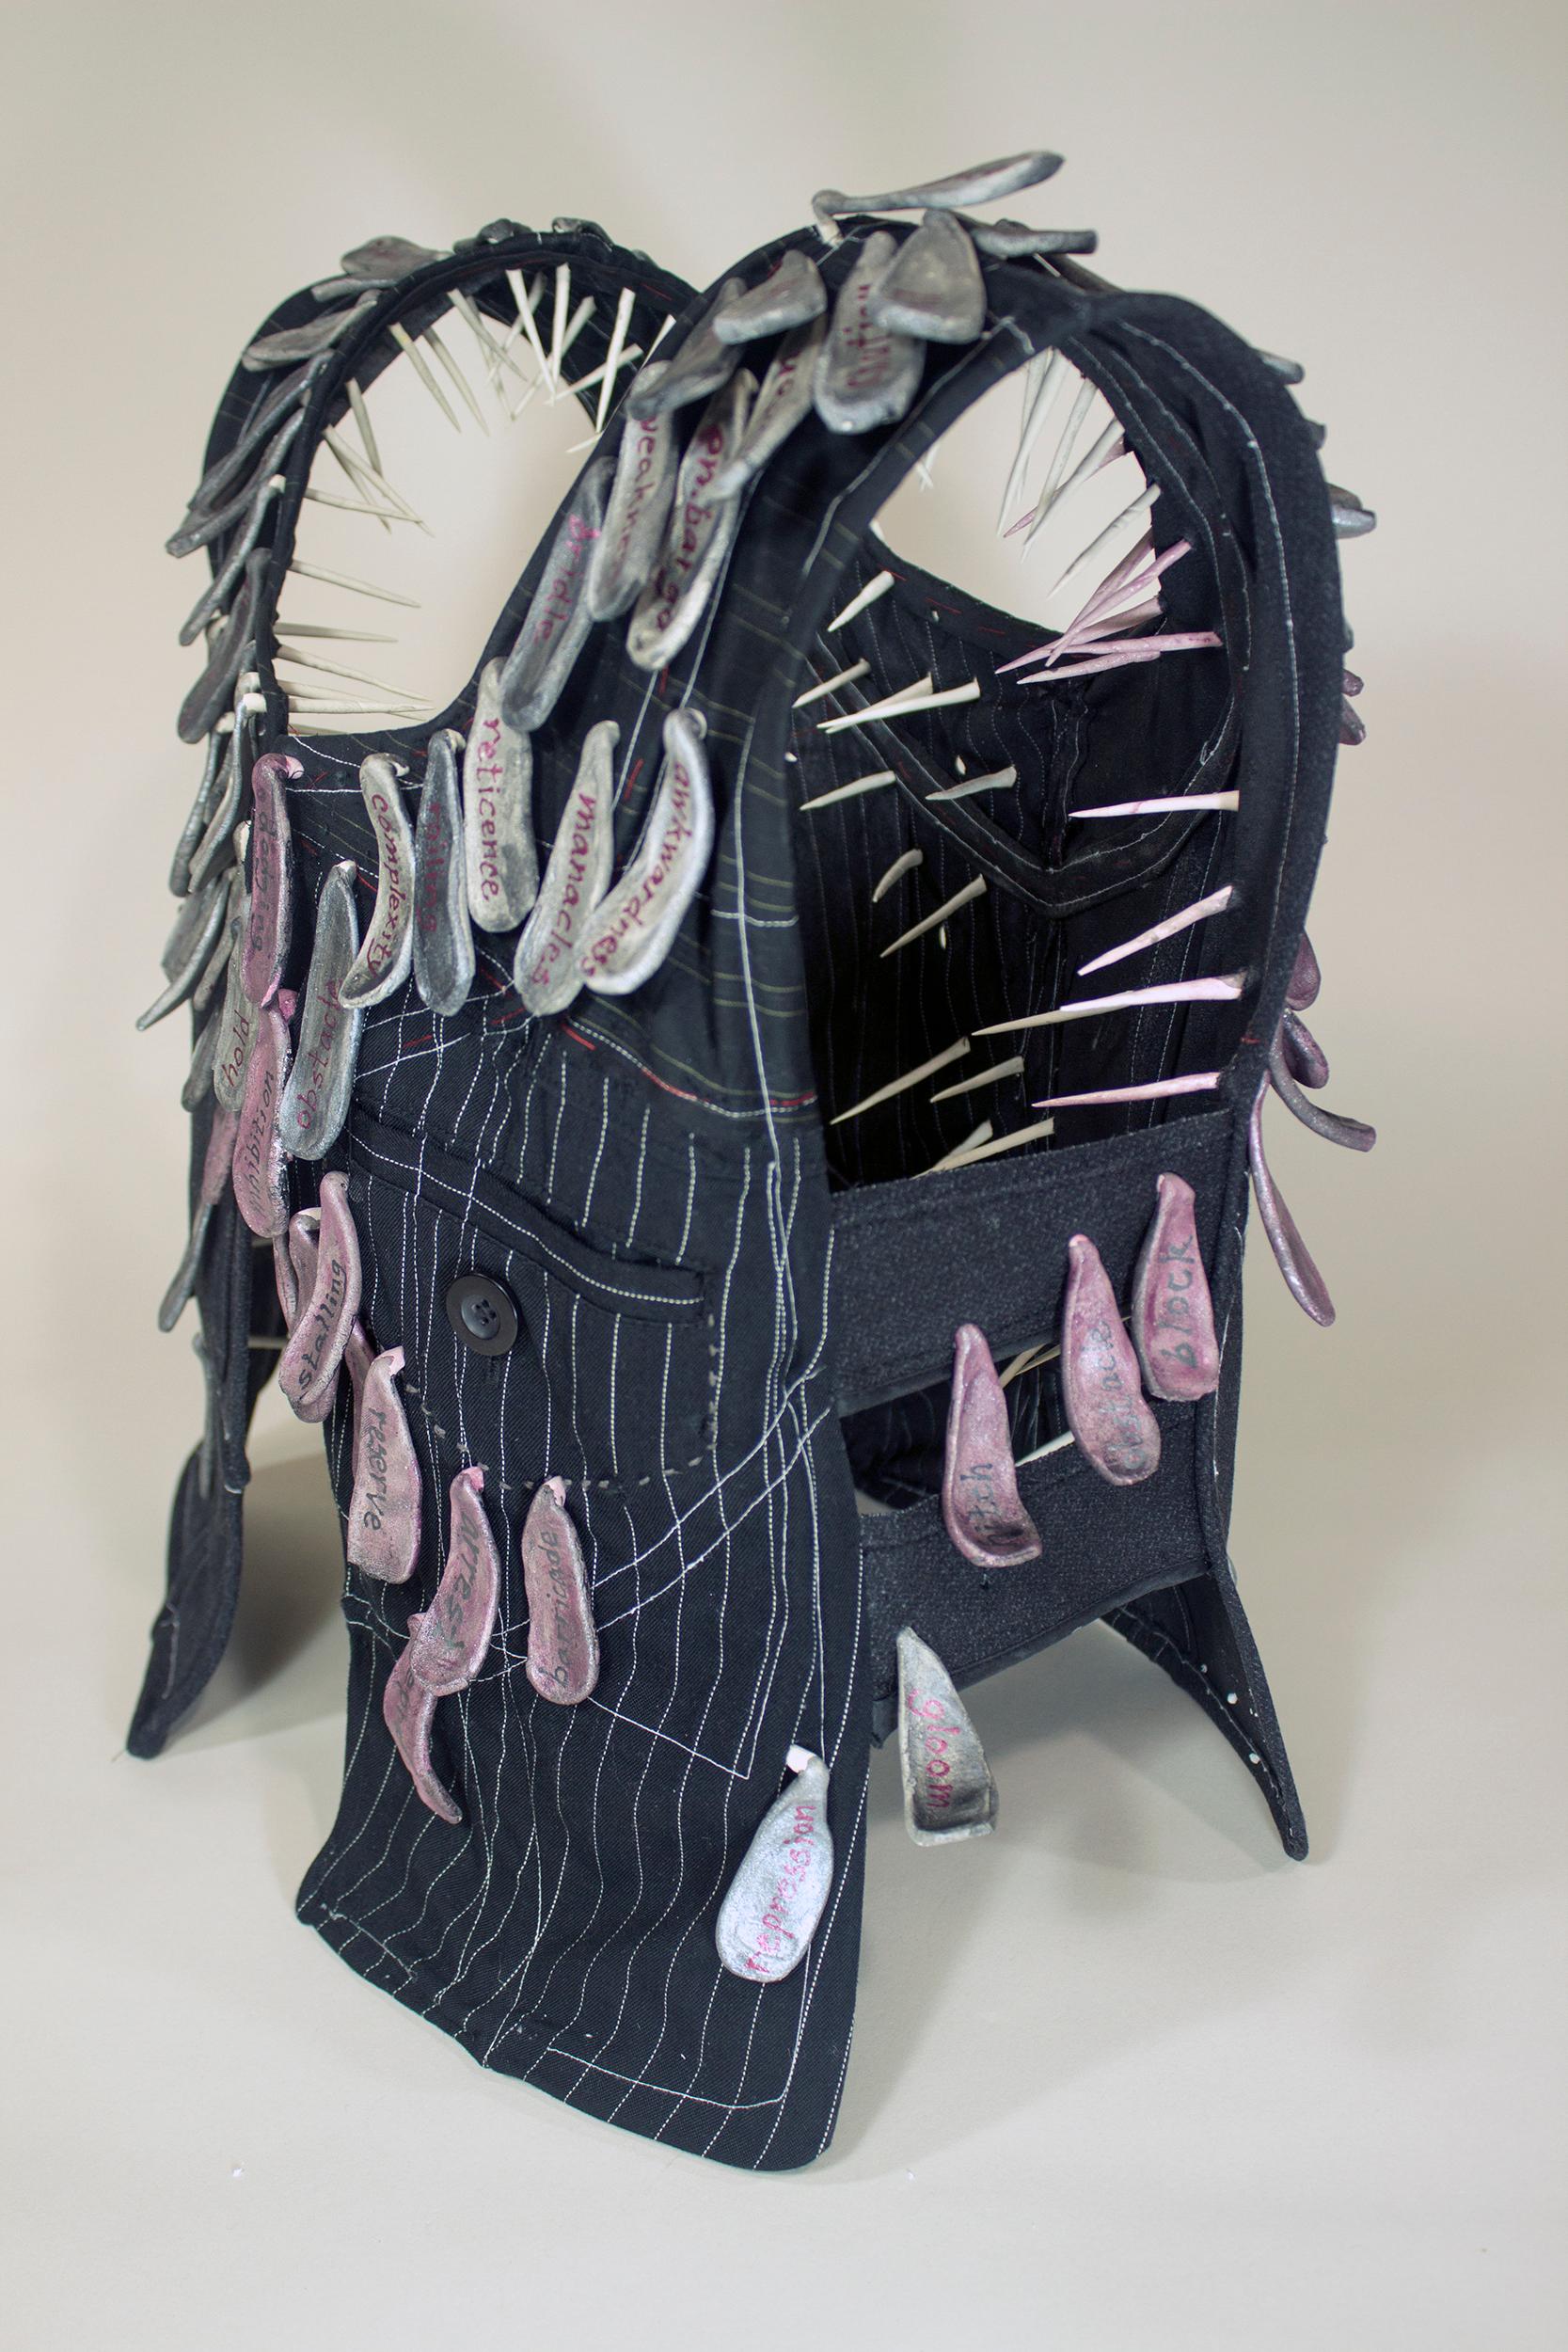 Virginia Mahoney’s “Restraint” is a mixed-media sculpture in vest form that is black with light pinstripes, and has attached ceramic tags in various shades of grey or muted pink, on which words, referring to practicing restraint, are handwritten in